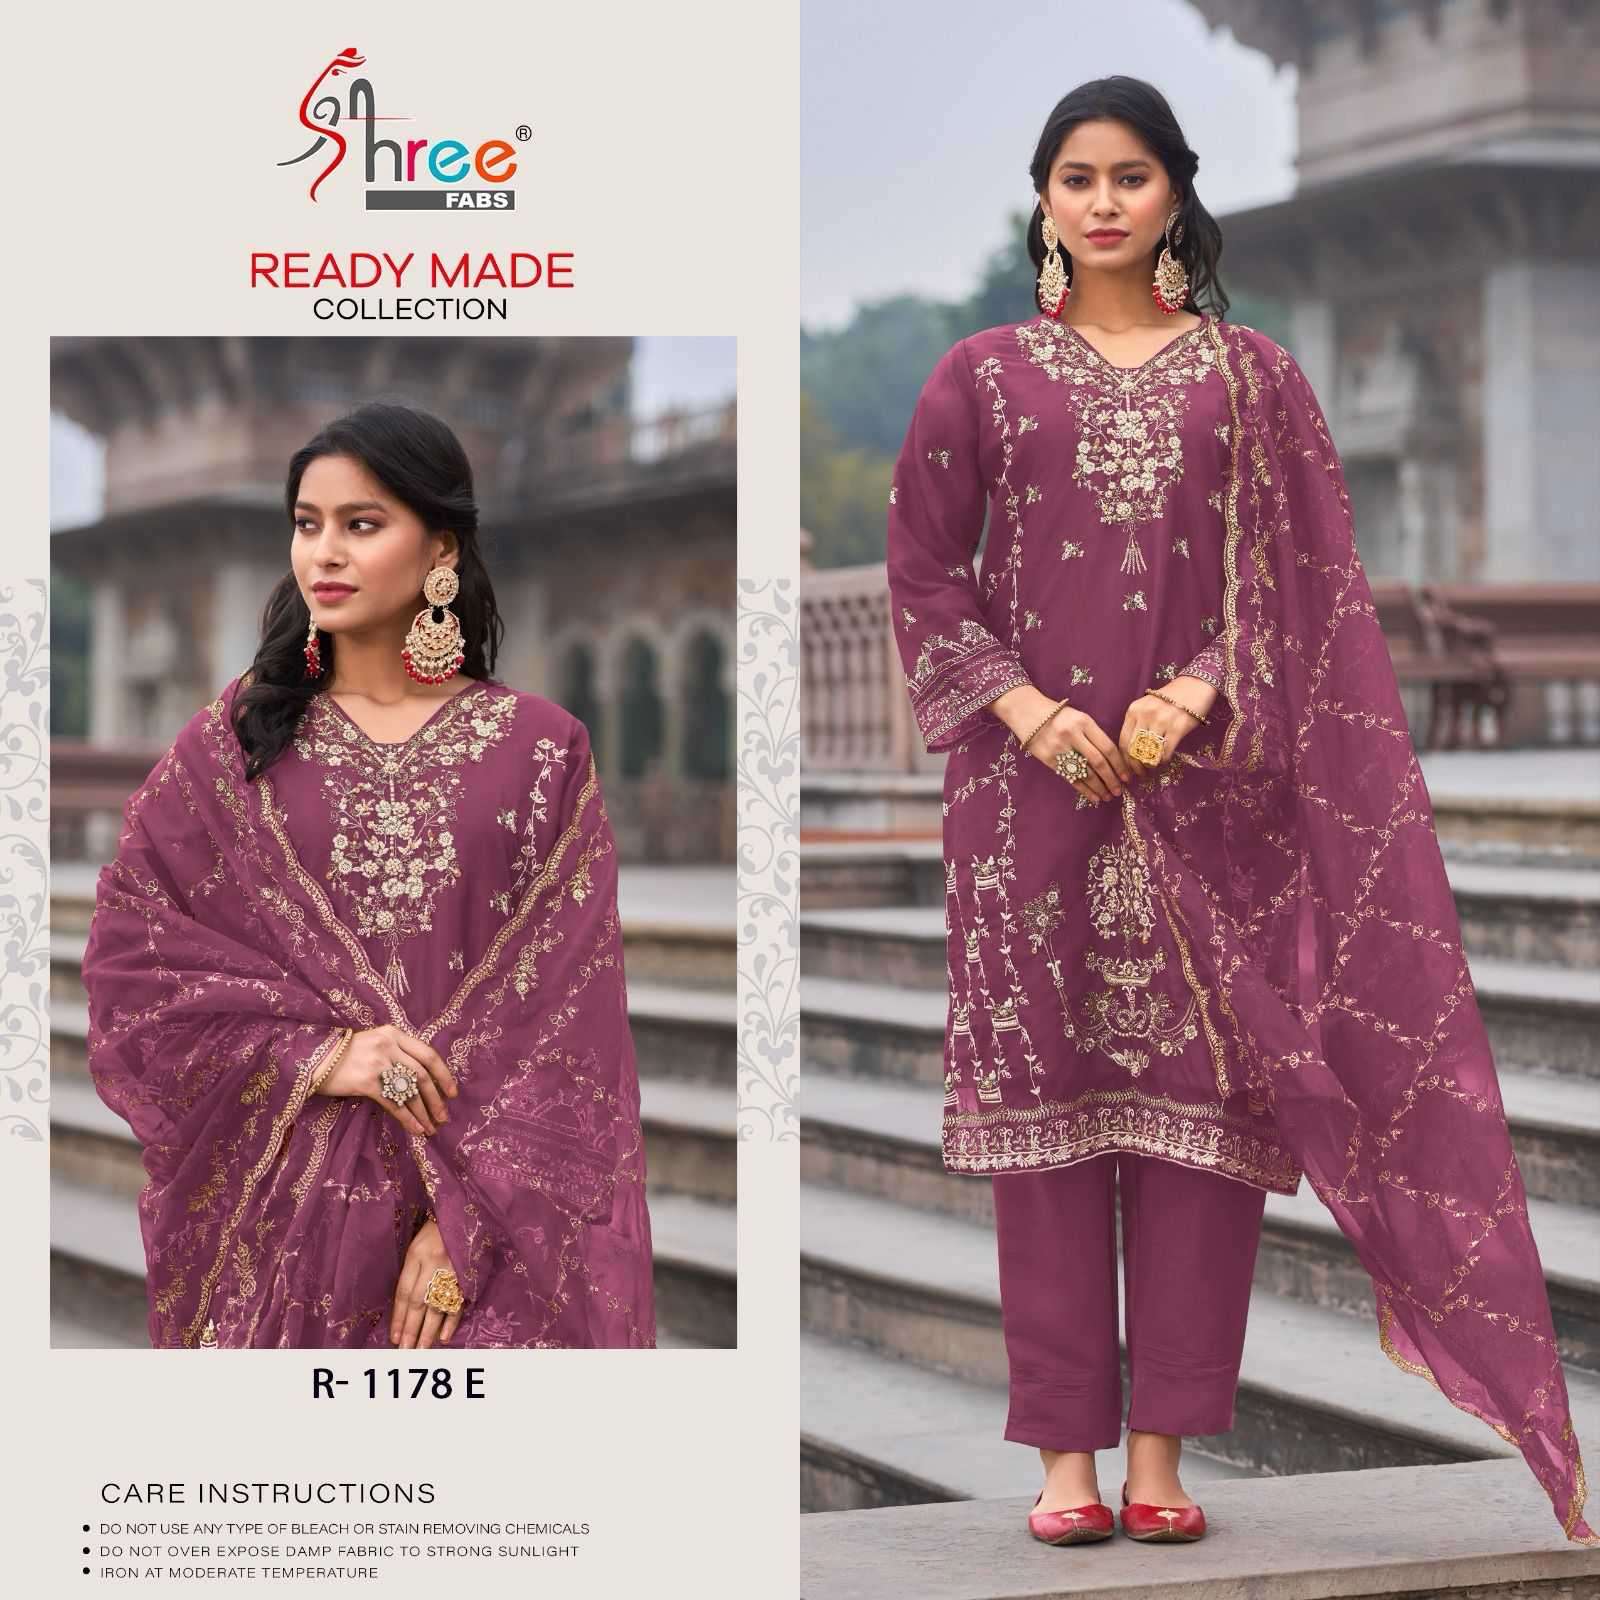 Shree Fabs R 1178 Colors Vol 2 Pakistani Organza Suit Readymade Collection